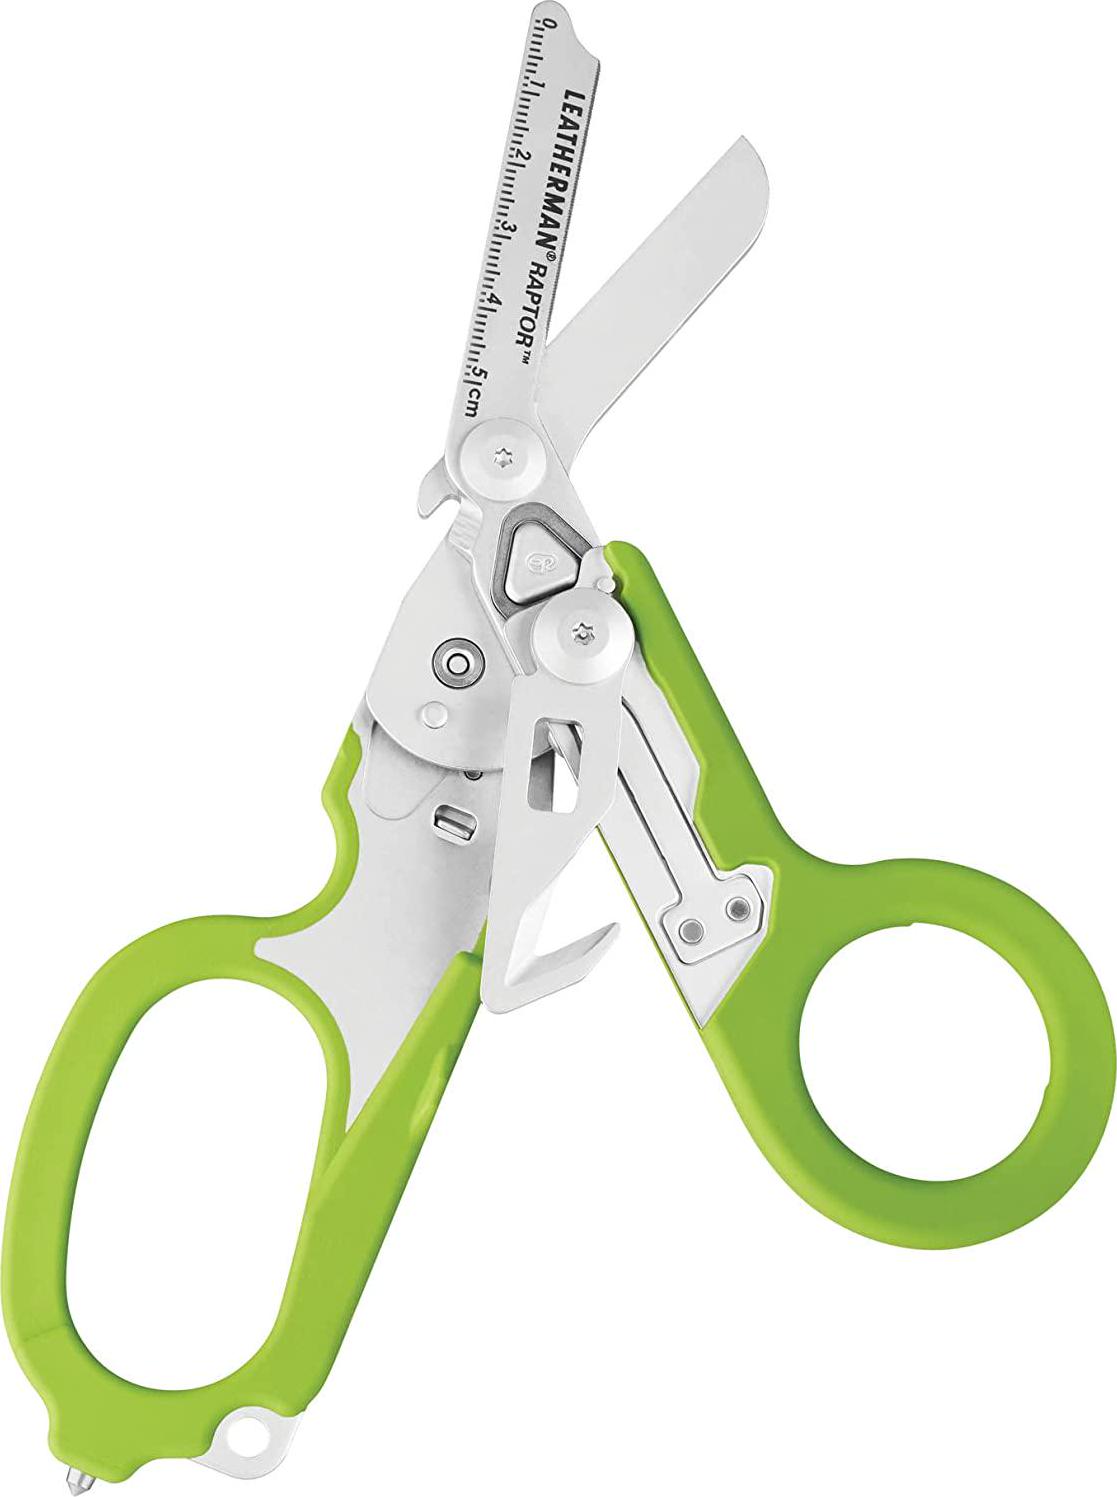 Leatherman, LEATHERMAN, Raptor Emergency Response Shears with Strap Cutter and Glass Breaker, Green with Utility Holster